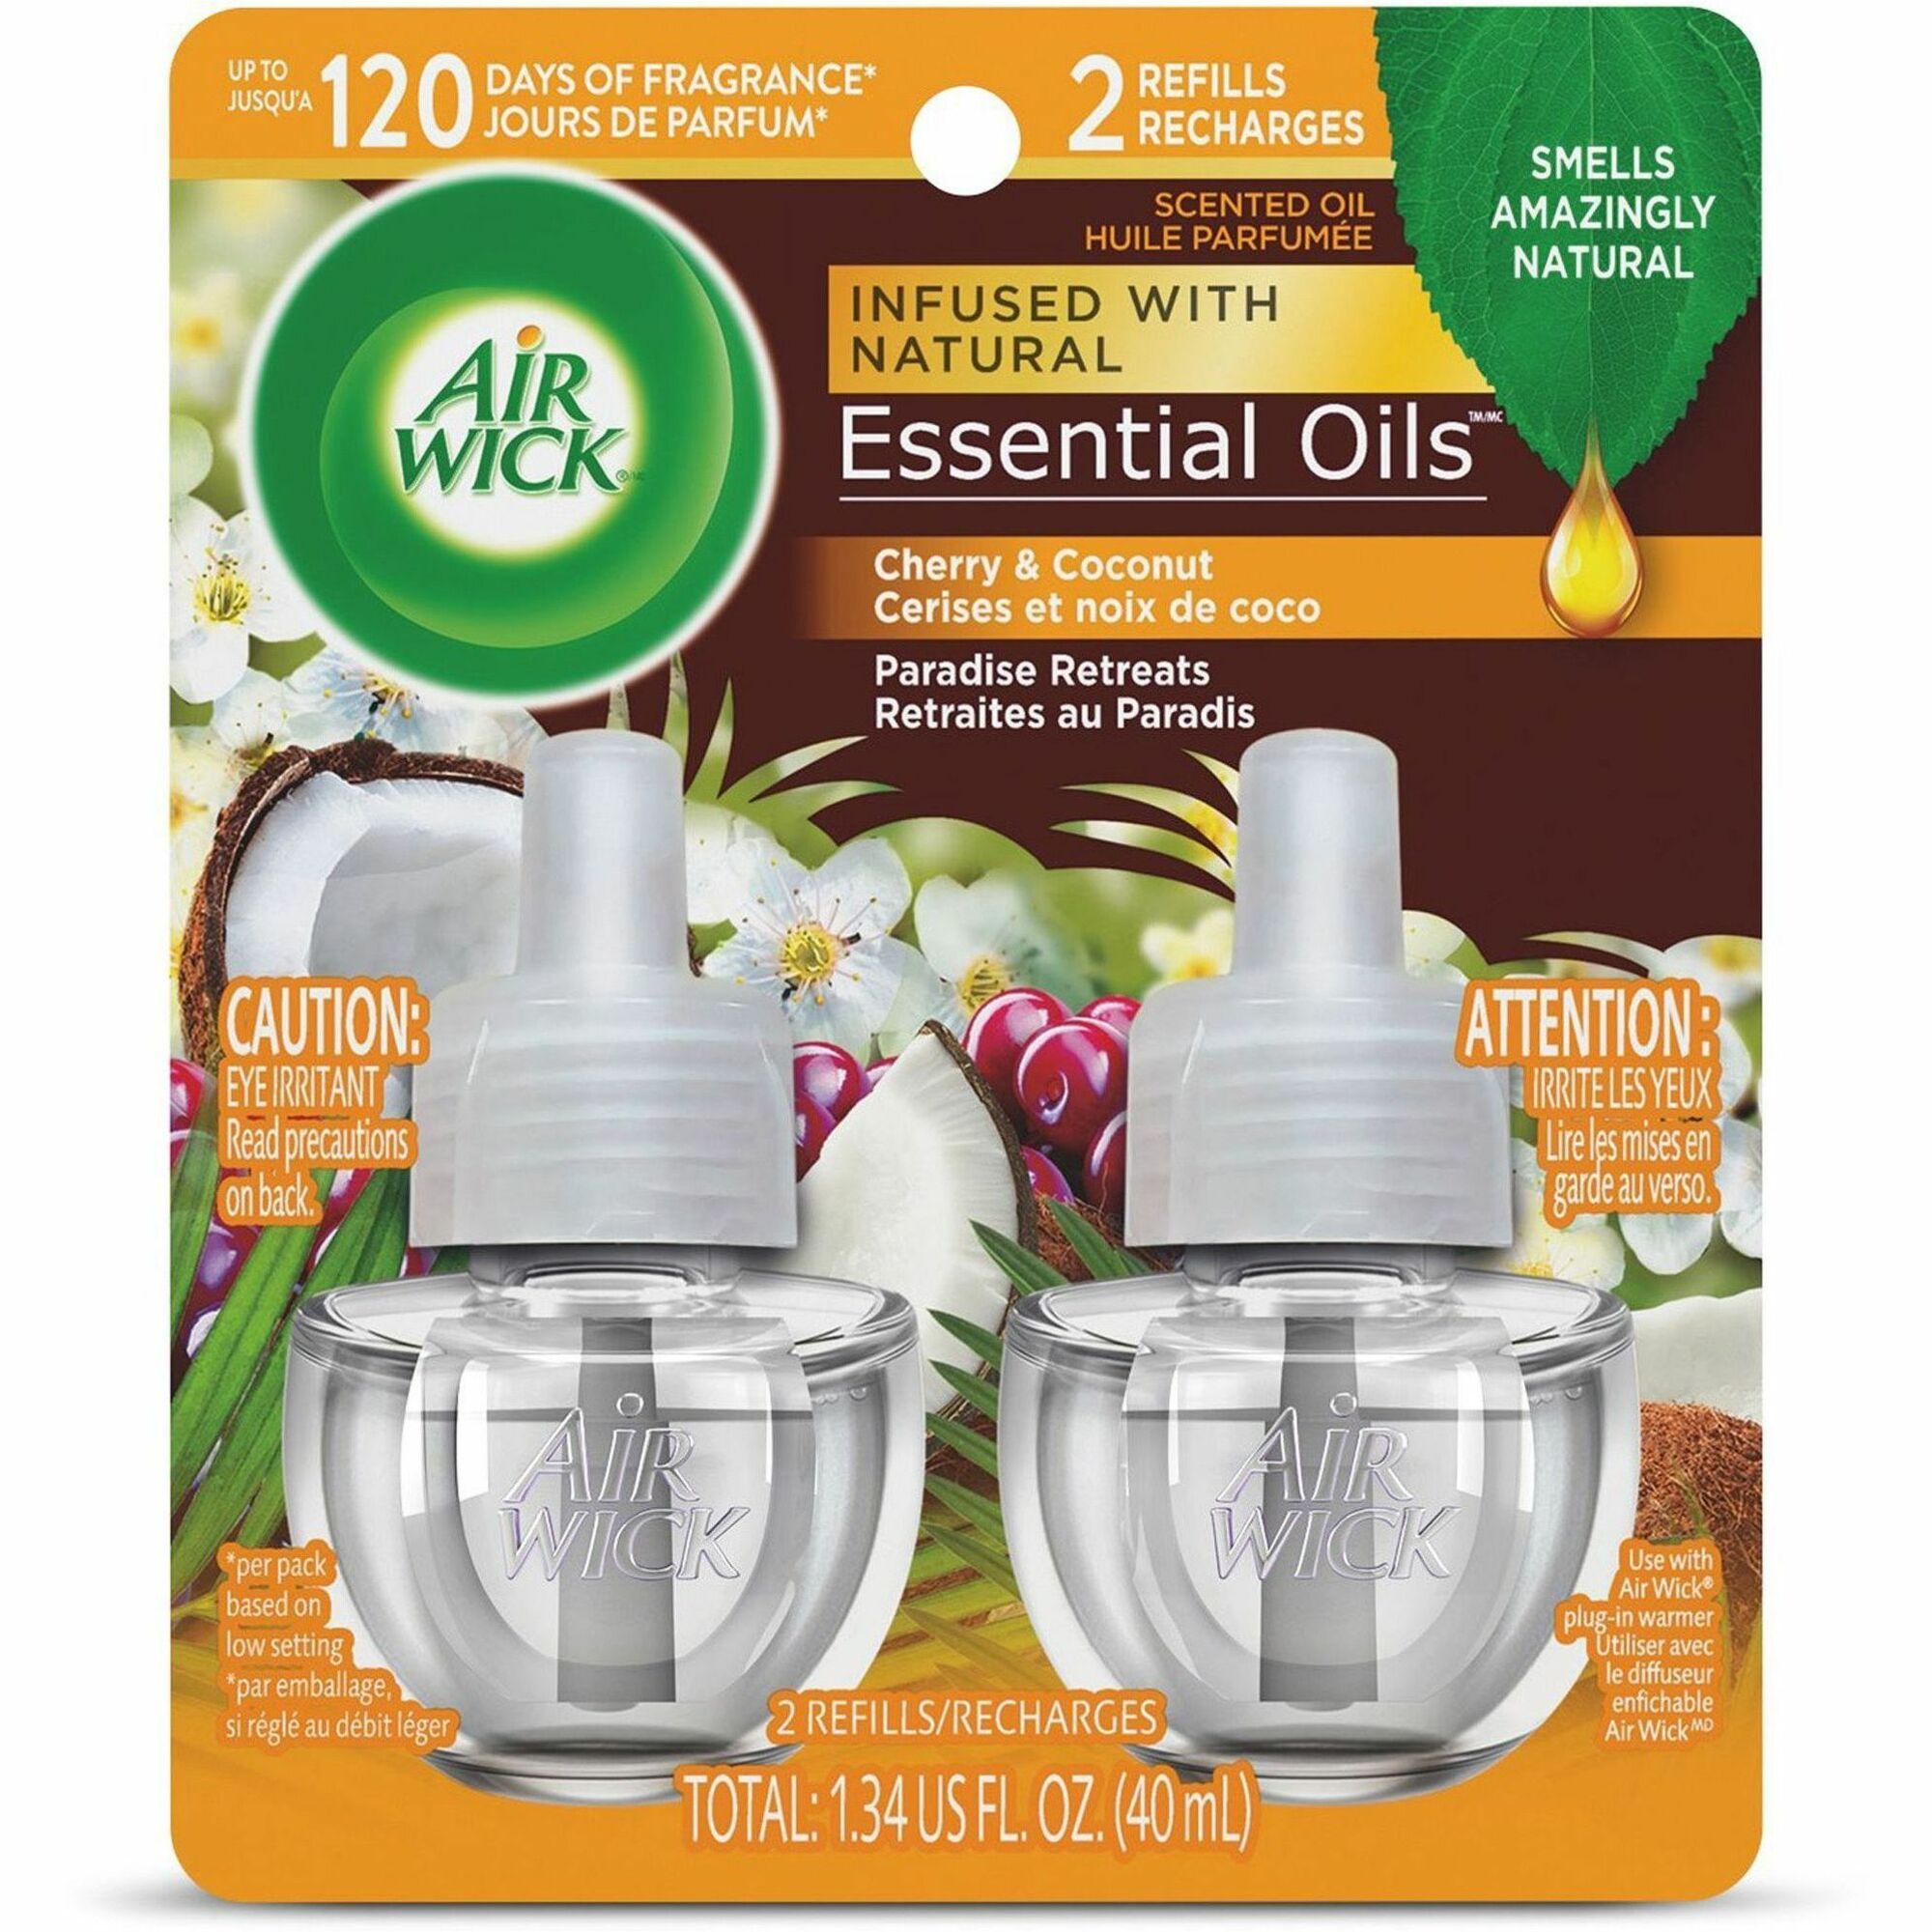 AIR WICK® Scented Oil - Hawaii